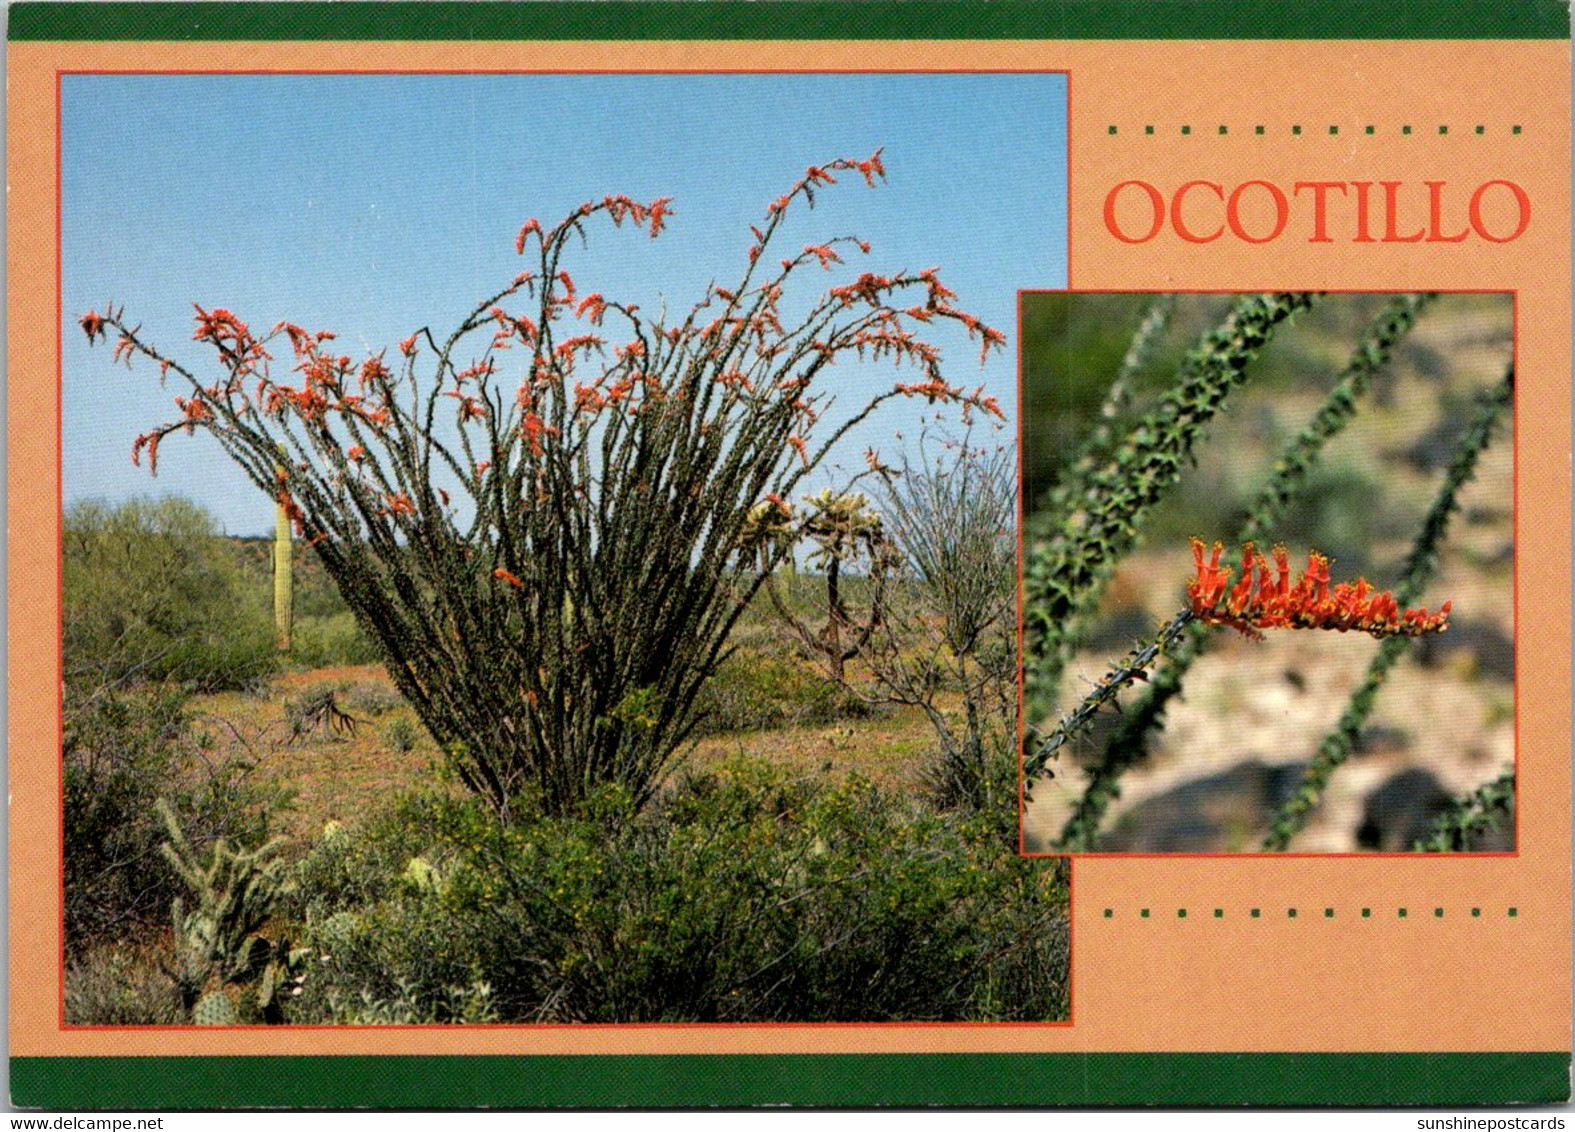 Cactus Ocotillo With Red Blossoms - Cactus